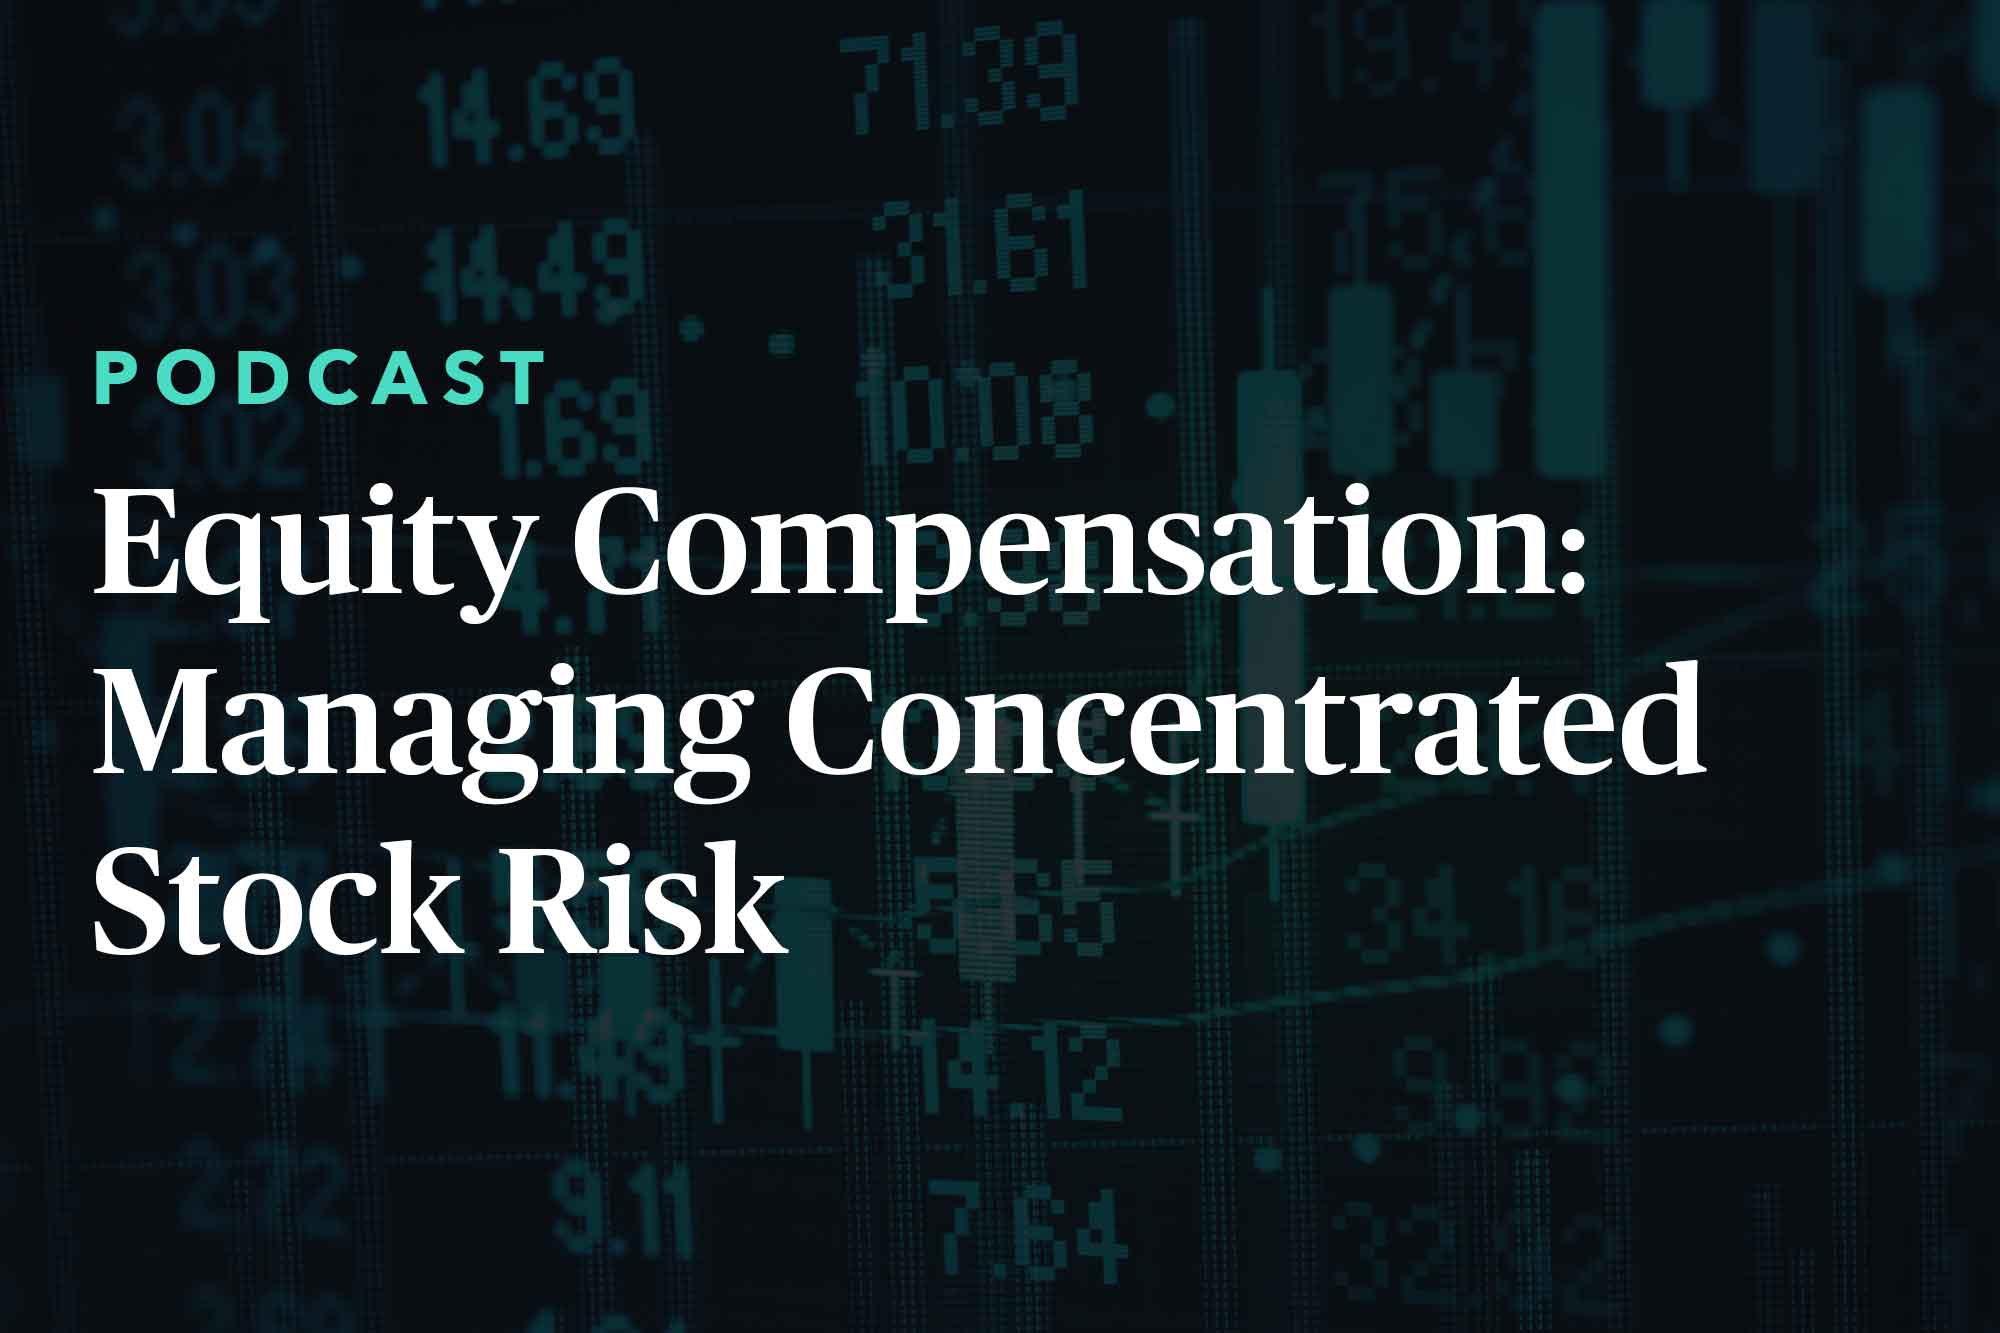 Part 3 of Equity Compensation: Managing Concentrated Stock Risk